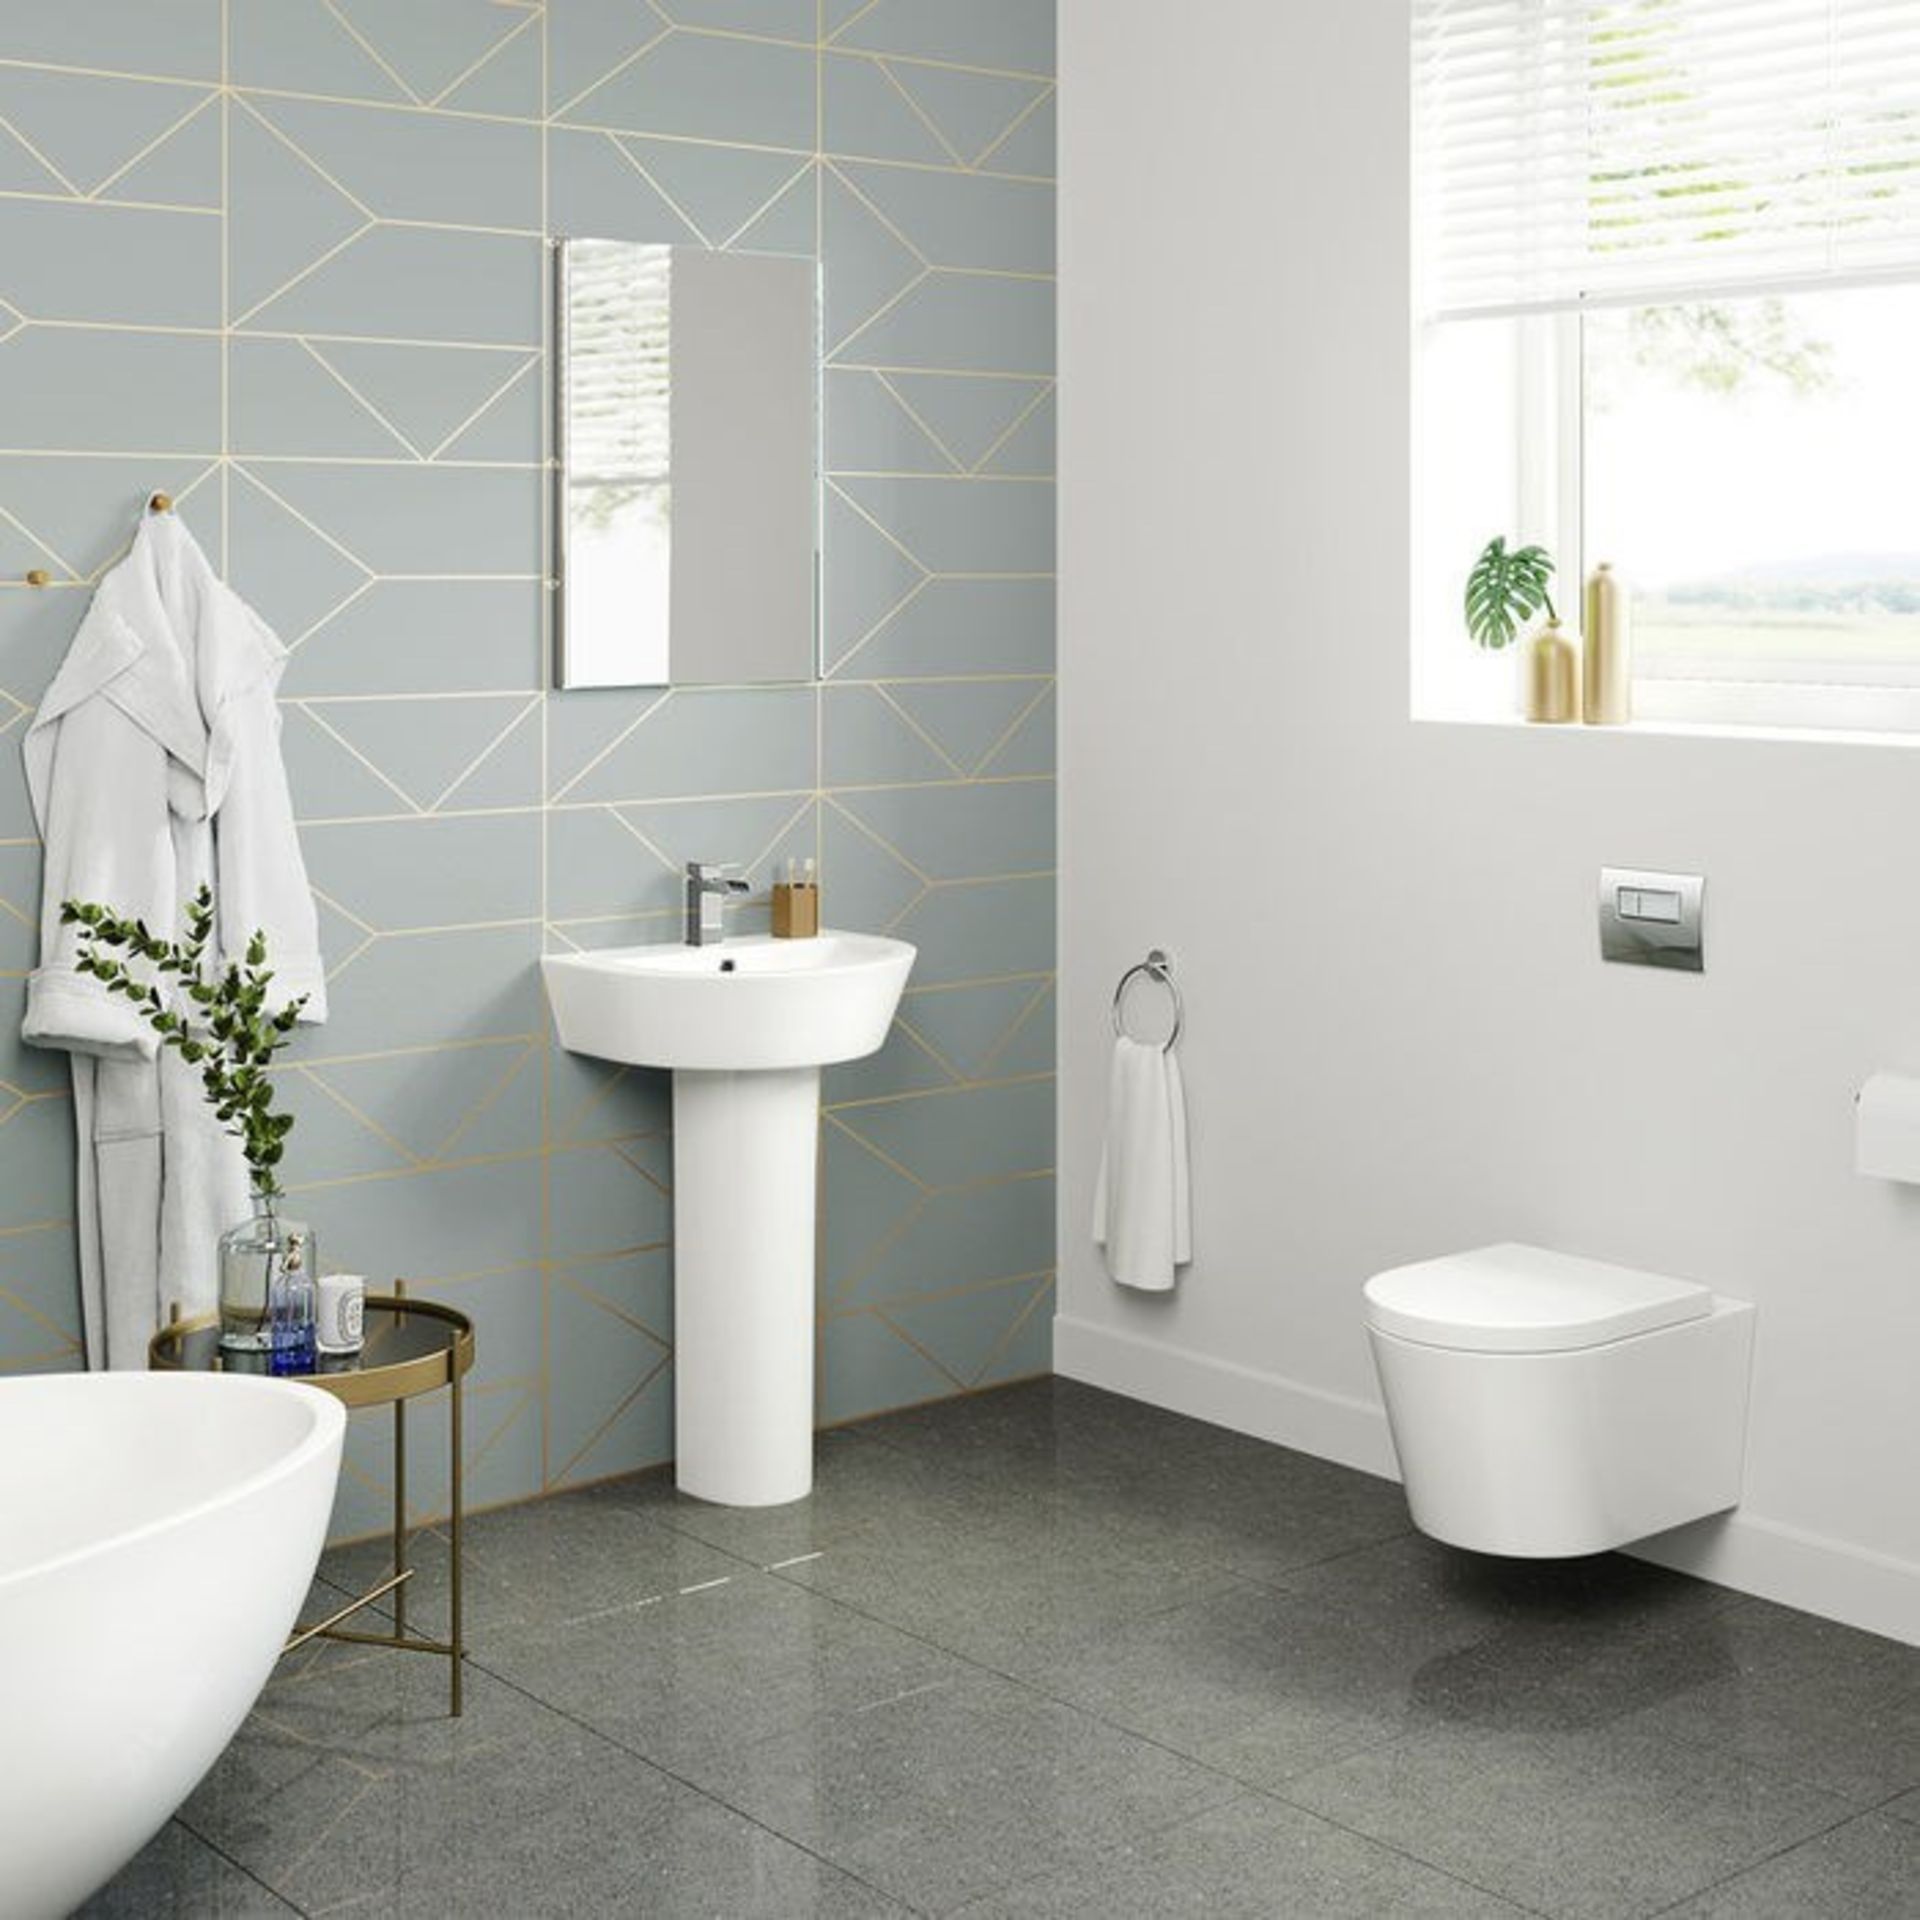 NEW & BOXED Lyon II Wall Hung Toilet inc Luxury Soft Close Seat. RRP £349.99 each.We love... - Image 2 of 2